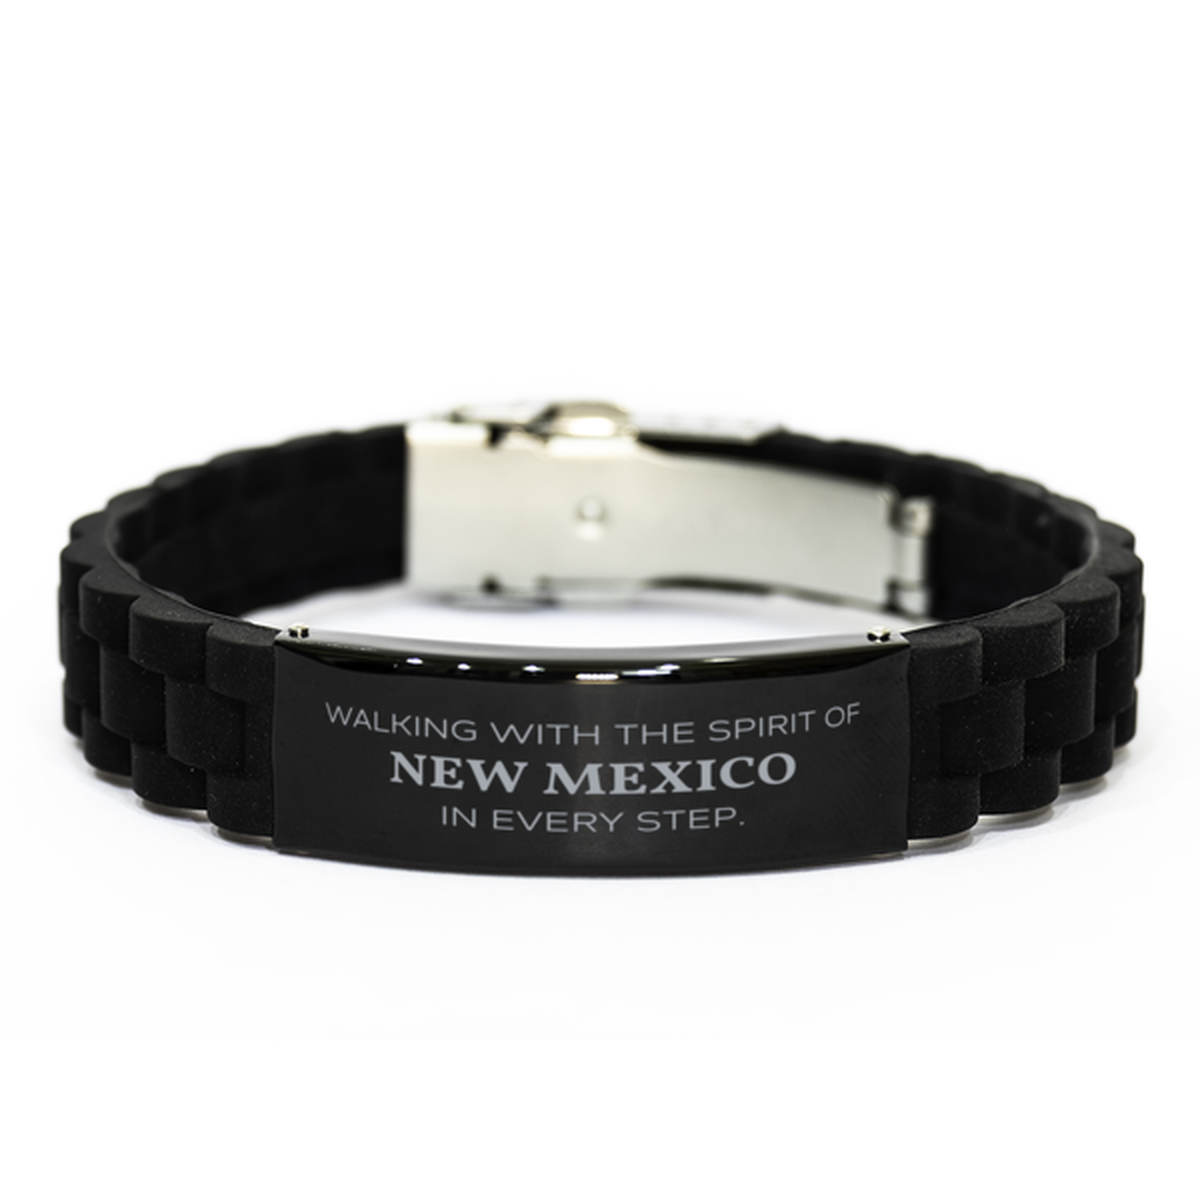 New Mexico Gifts, Walking with the spirit, Love New Mexico Birthday Christmas Black Glidelock Clasp Bracelet For New Mexico People, Men, Women, Friends